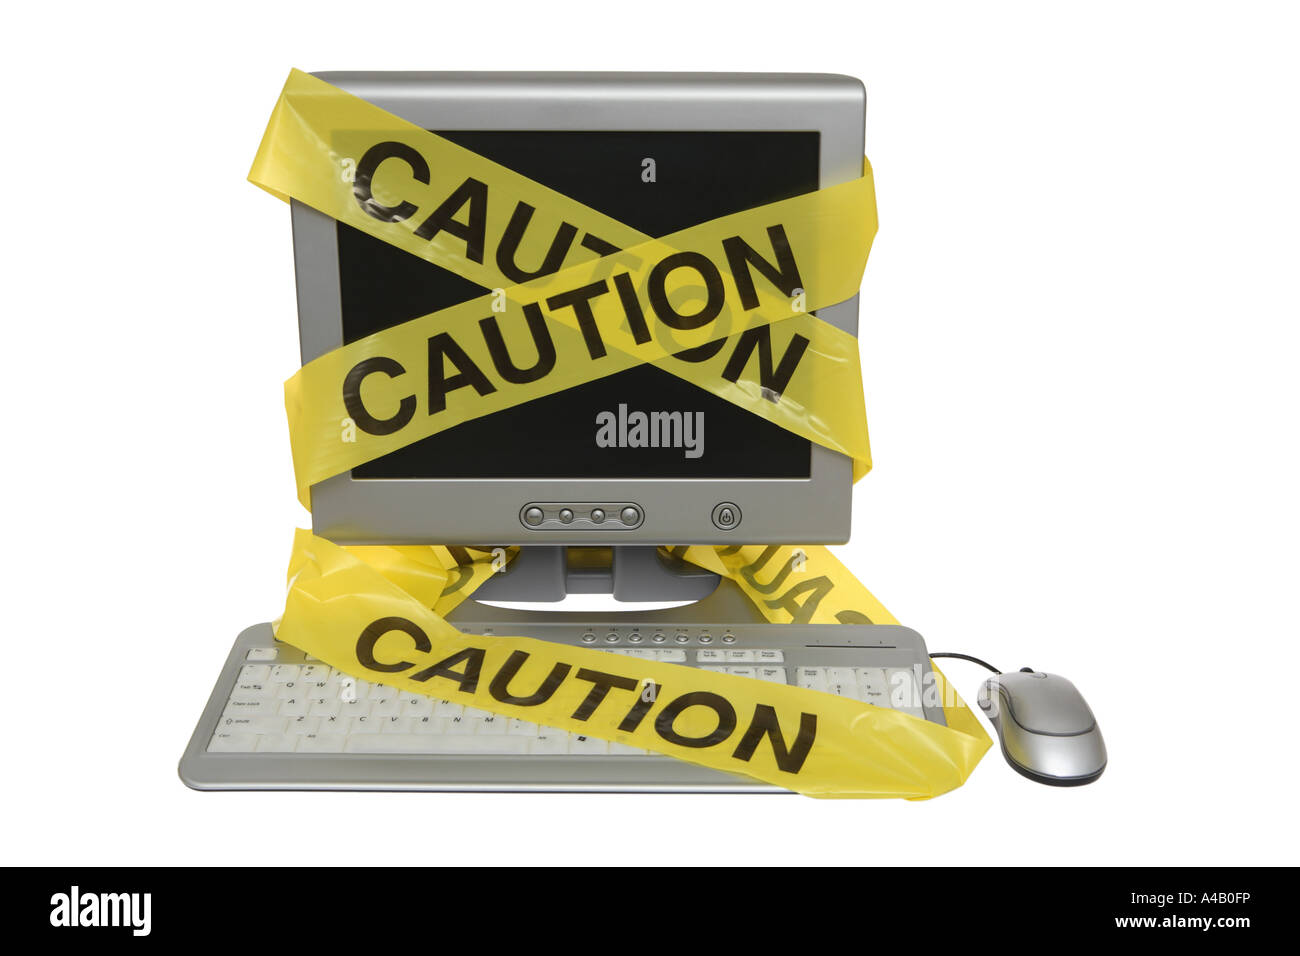 Caution Tape on Computer cut out on white background Stock Photo